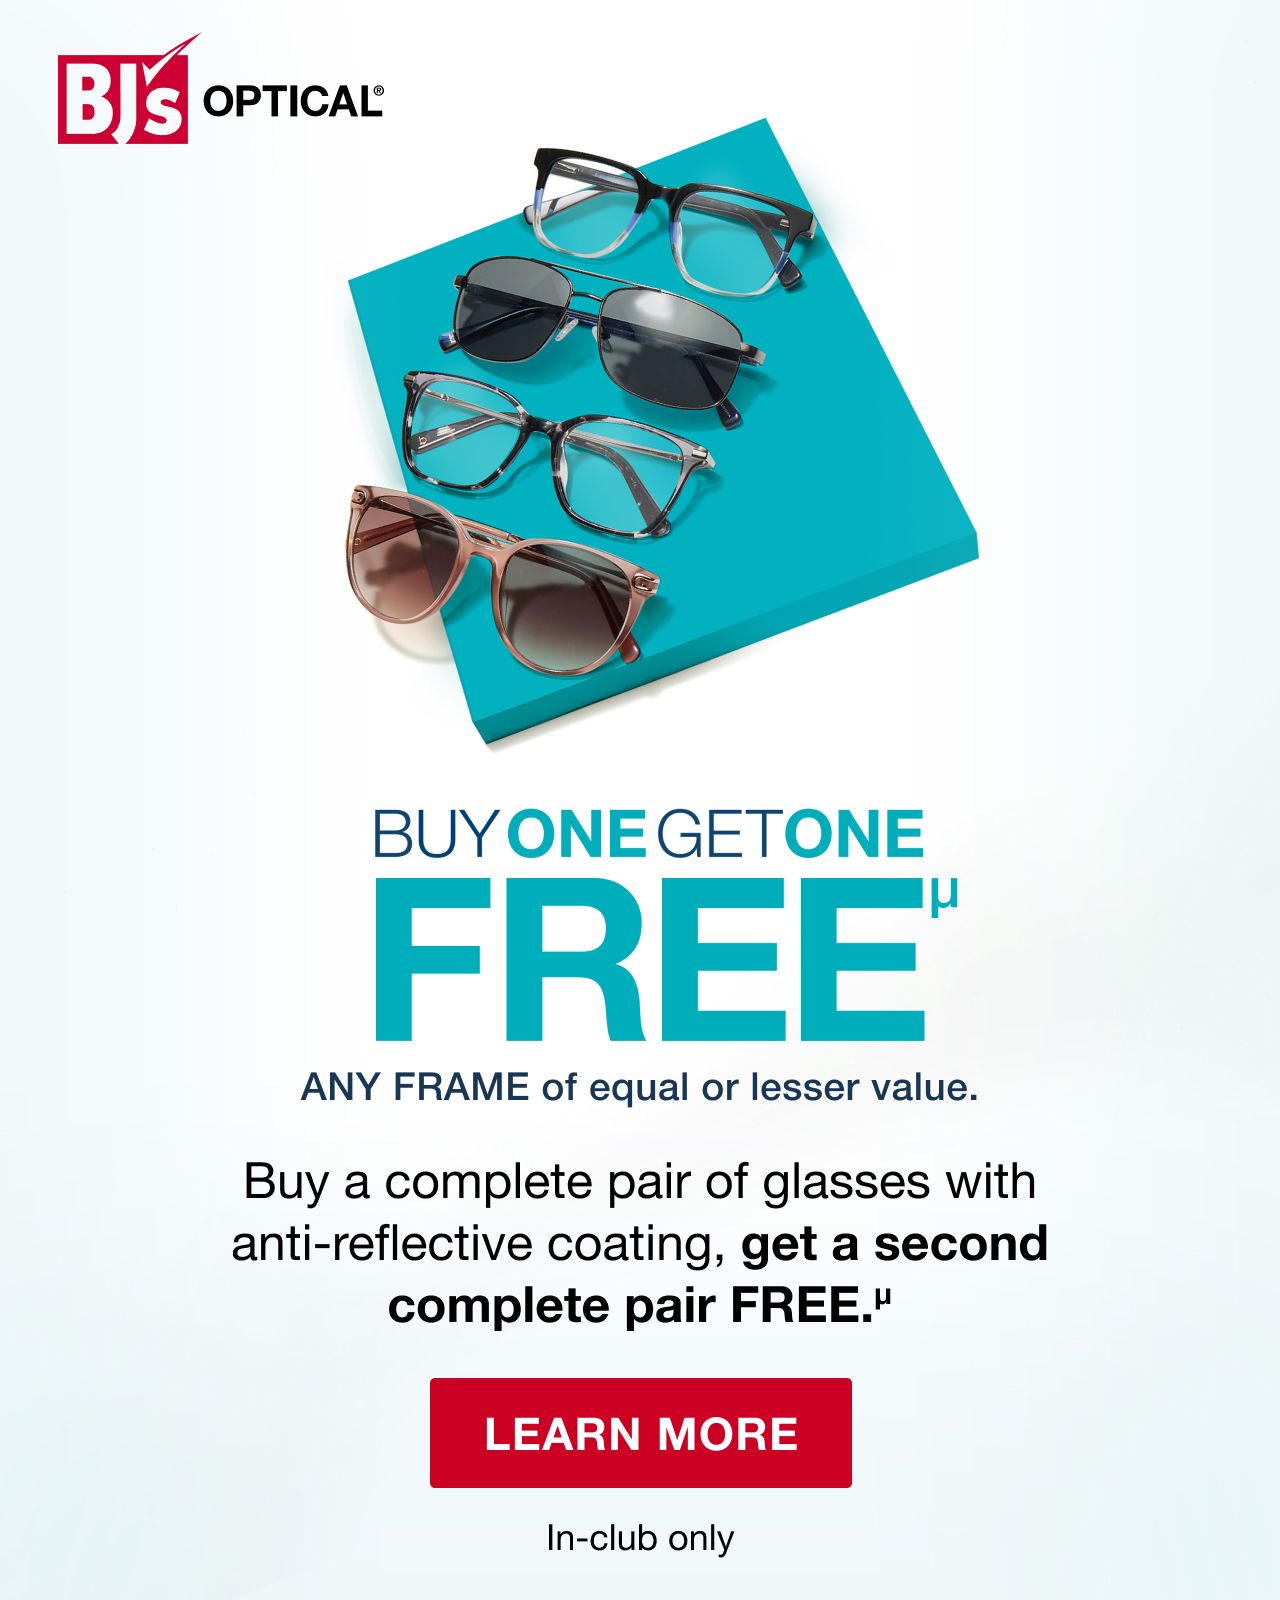 Buy One Get One FREE ANY FRAME of equal or lesser value. In-club only. Terms apply. Learn More